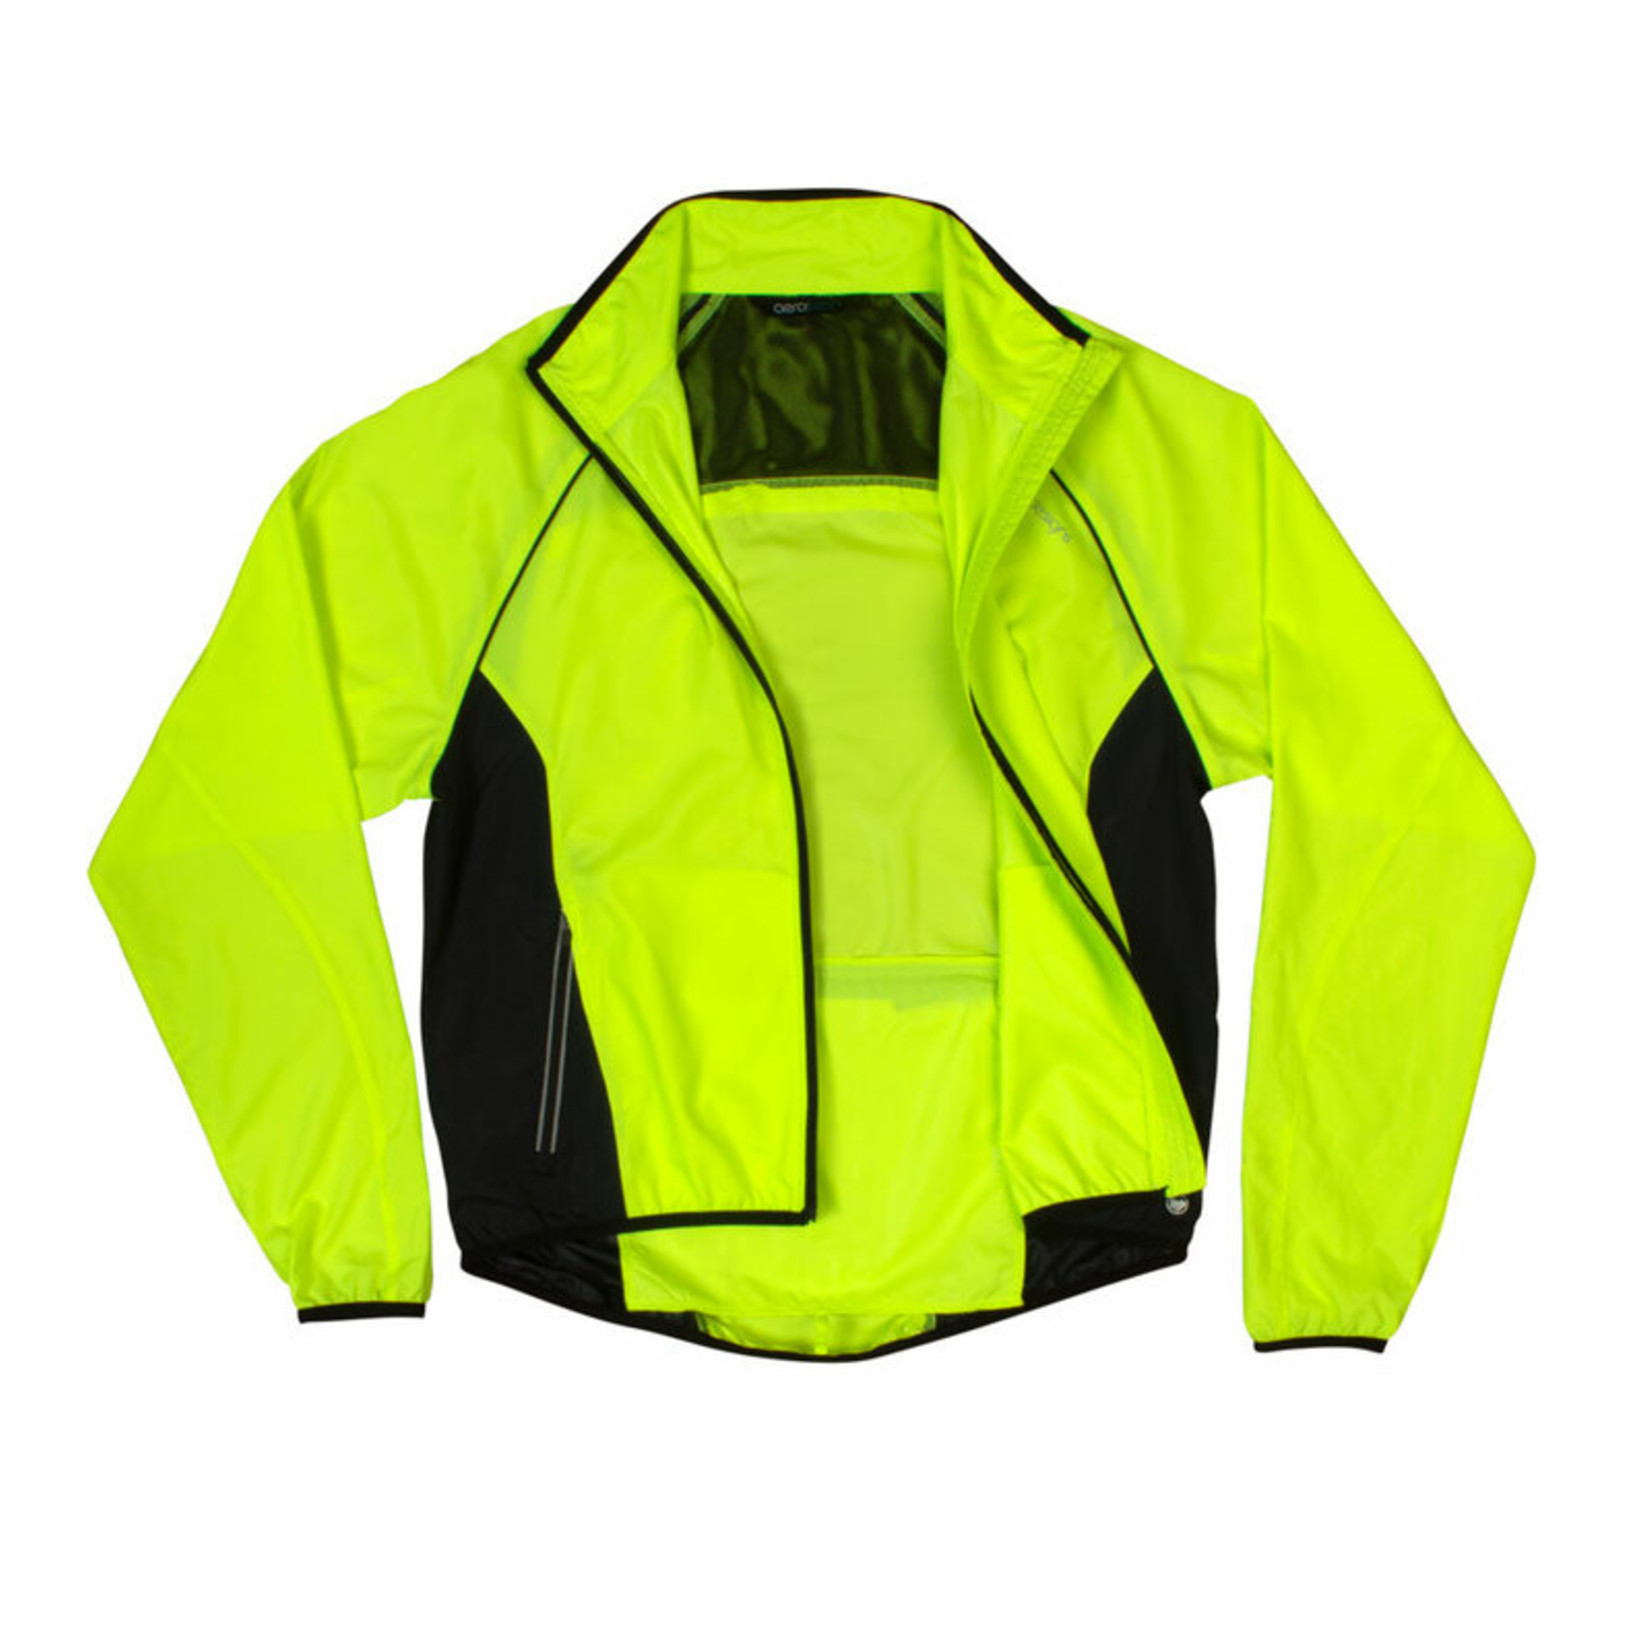 Aero Tech Men's Windproof Packable Safety Jacket - High Visibility Windbreaker